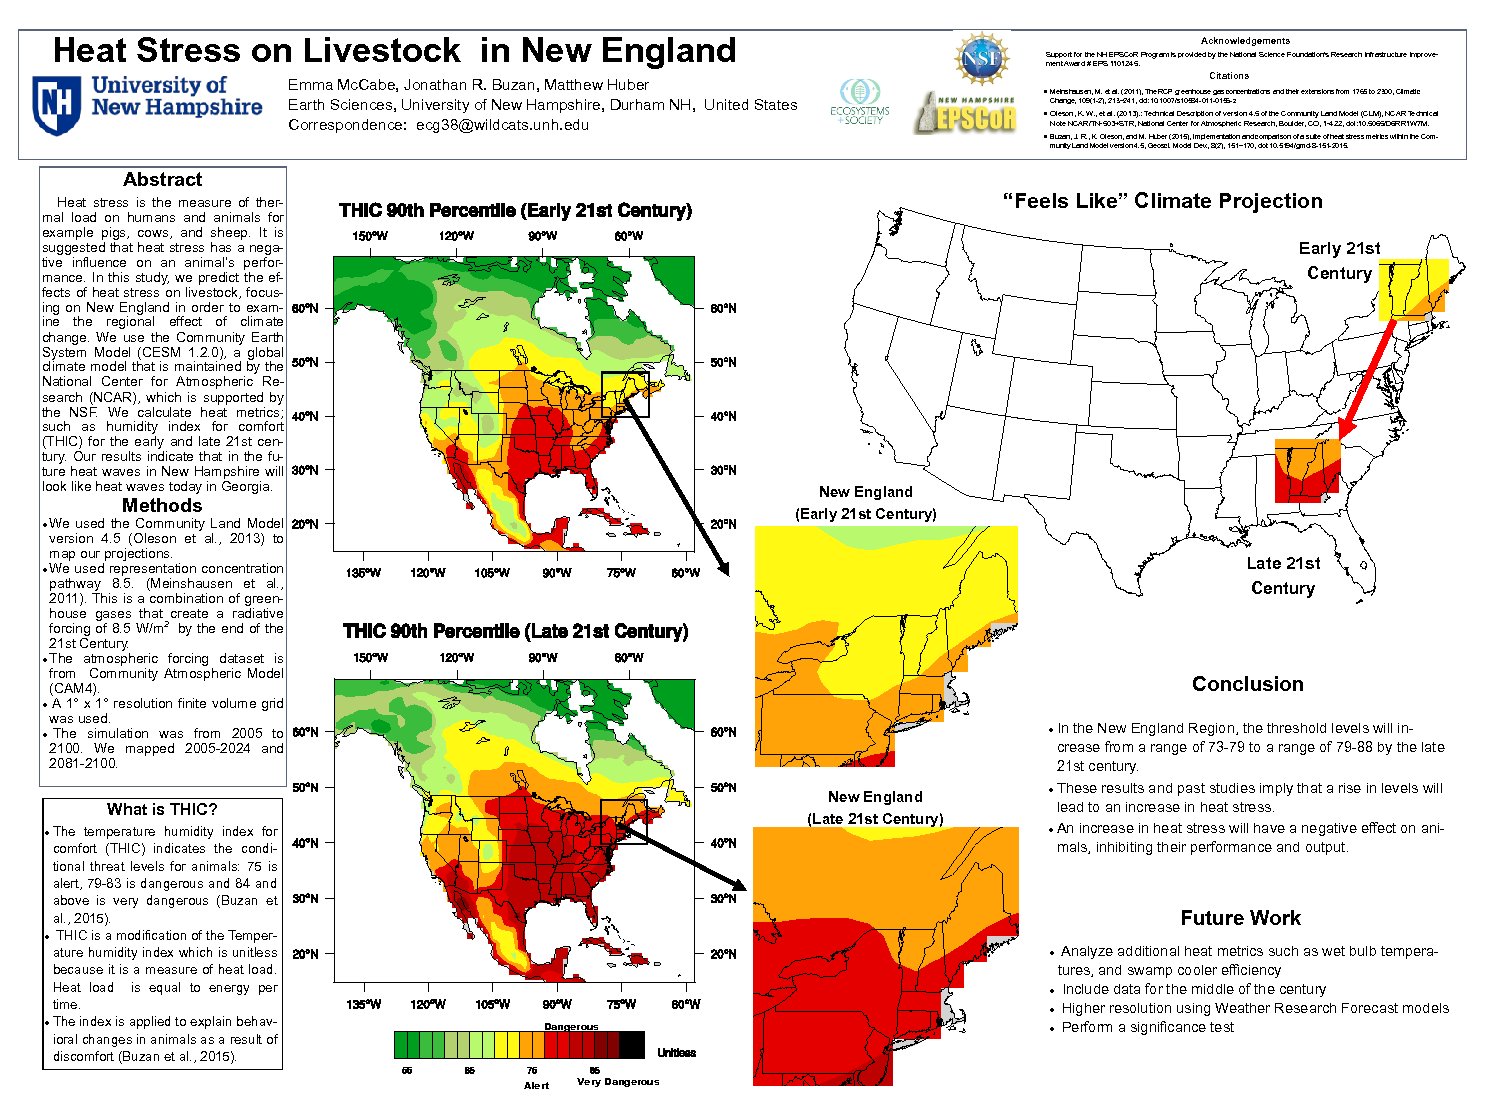 Heat Stress On Livestock In New England by ecg38